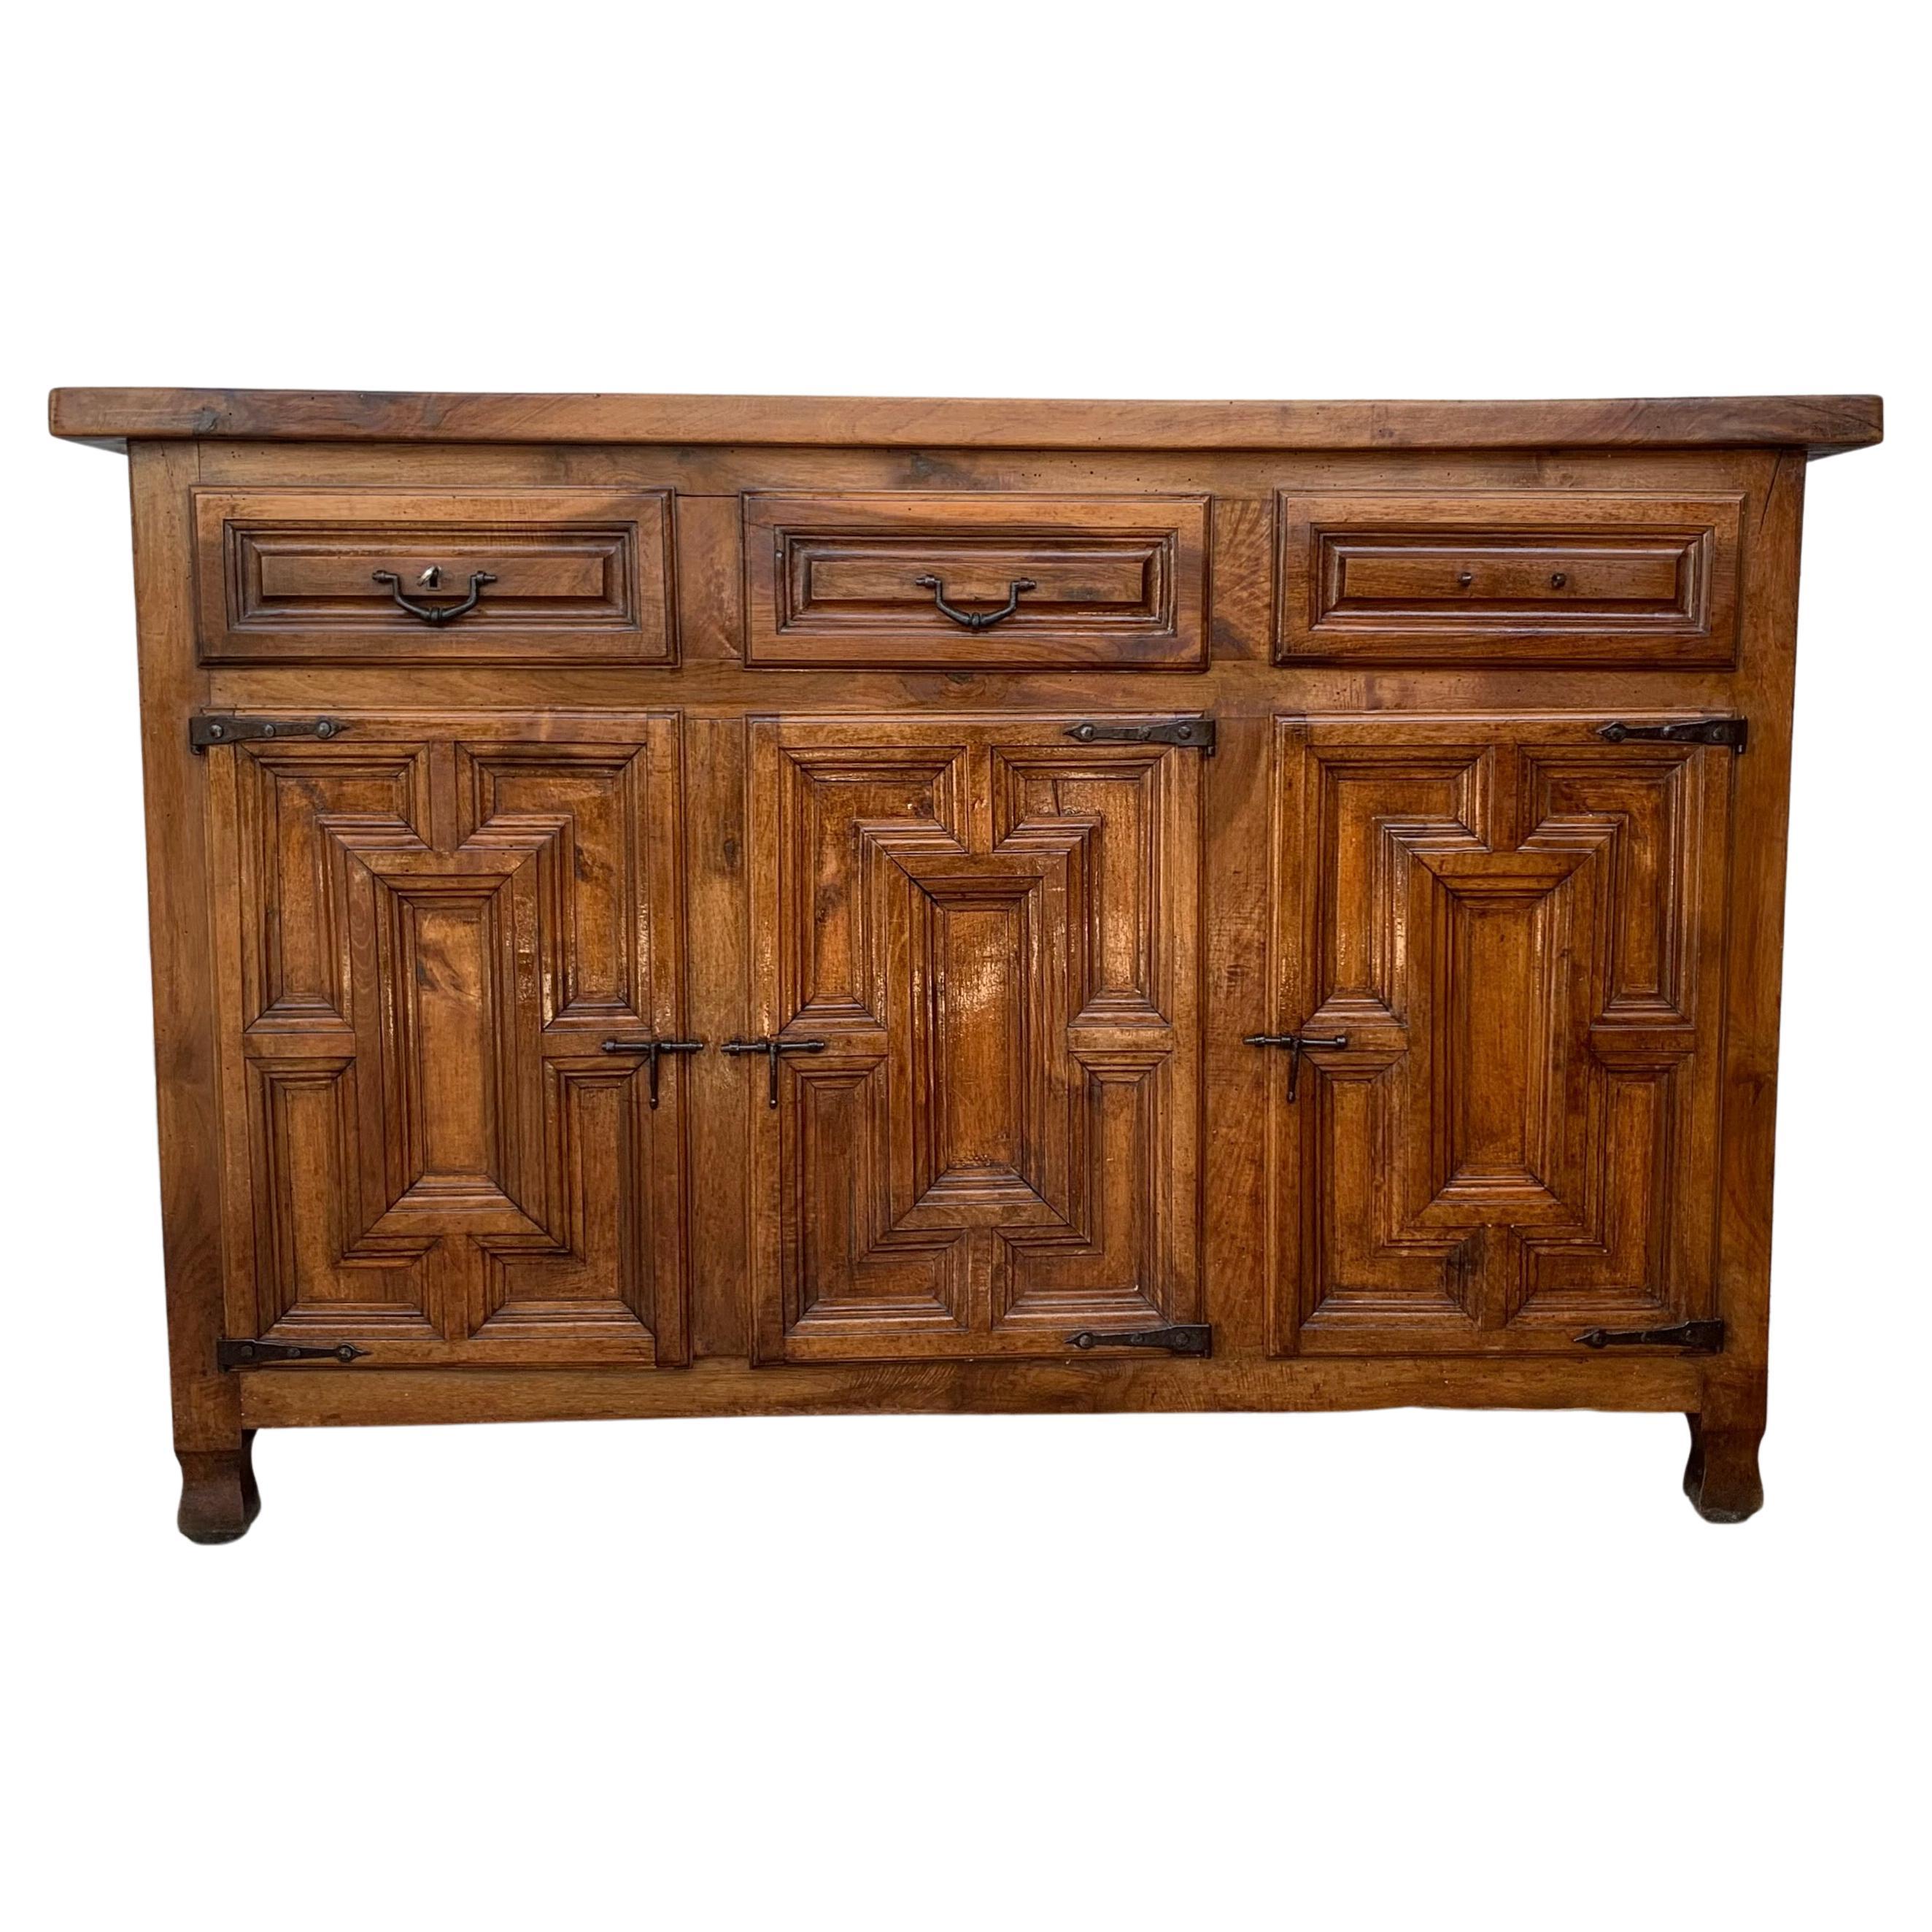 19th Large Catalan Spanish Baroque Carved Light Walnut Credenza or Buffet For Sale